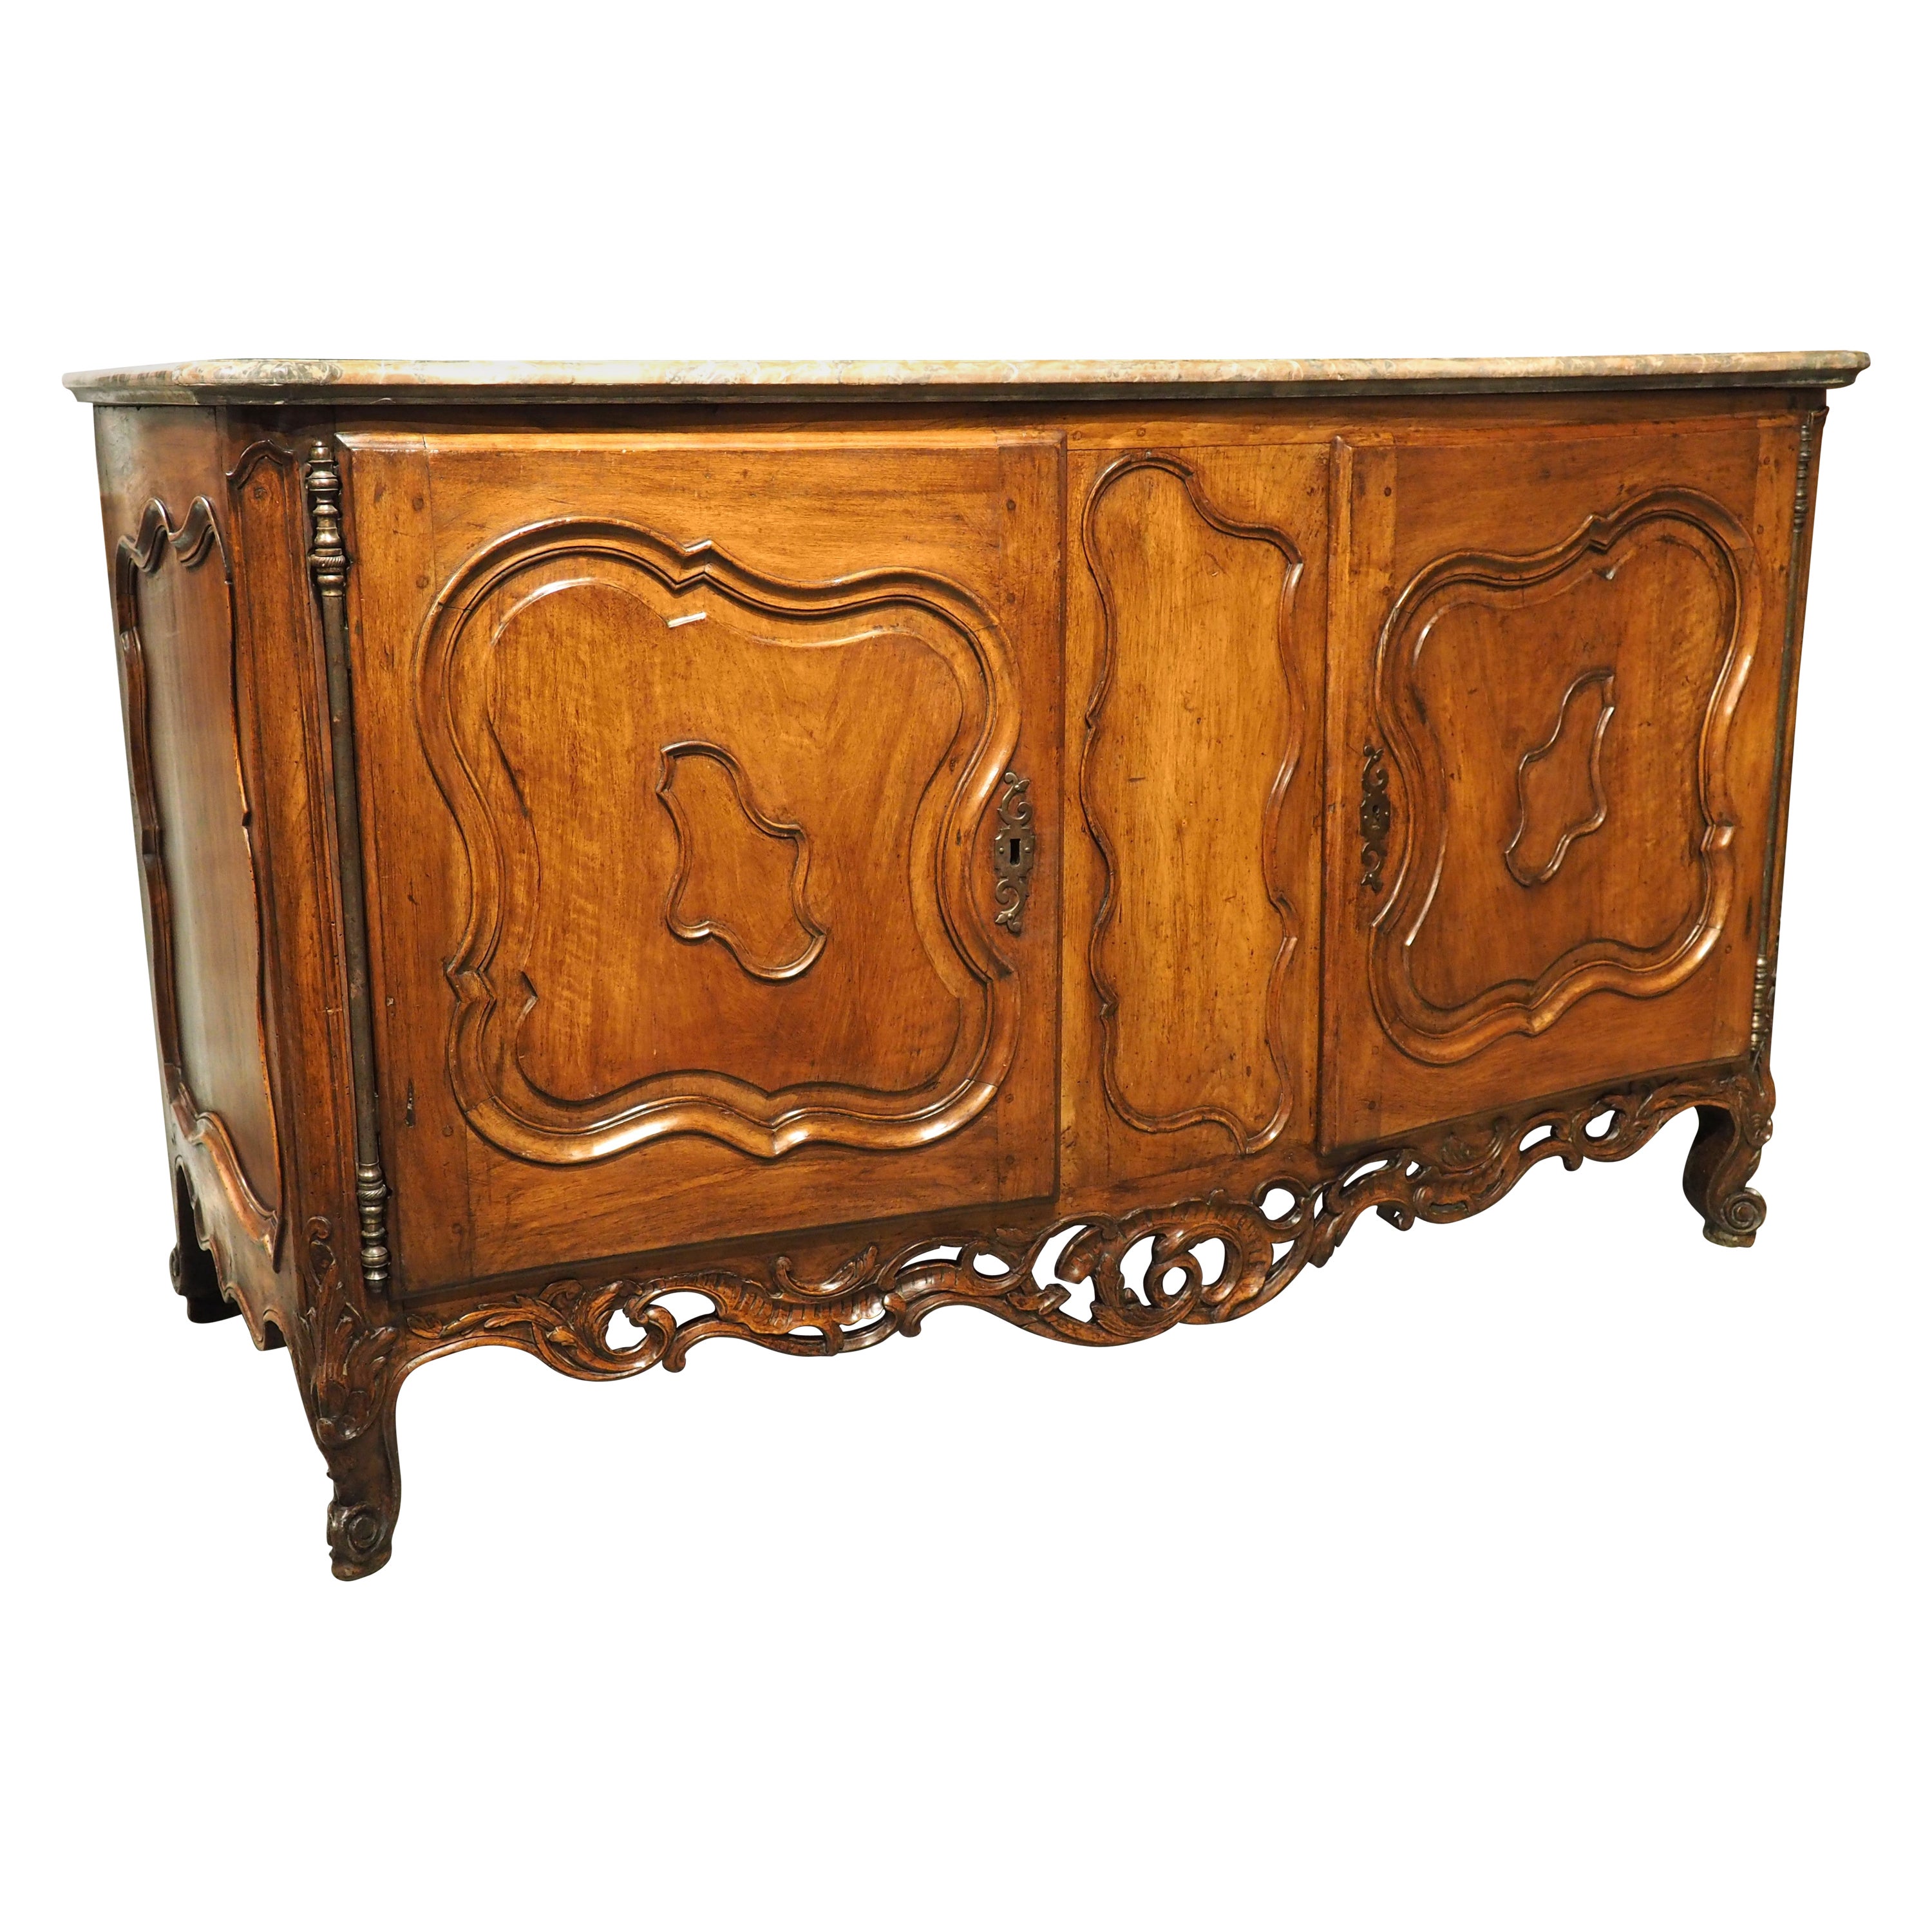 Exceptional and Large Walnut Wood Buffet de Chateau, Nimes, France, C. 1750 For Sale